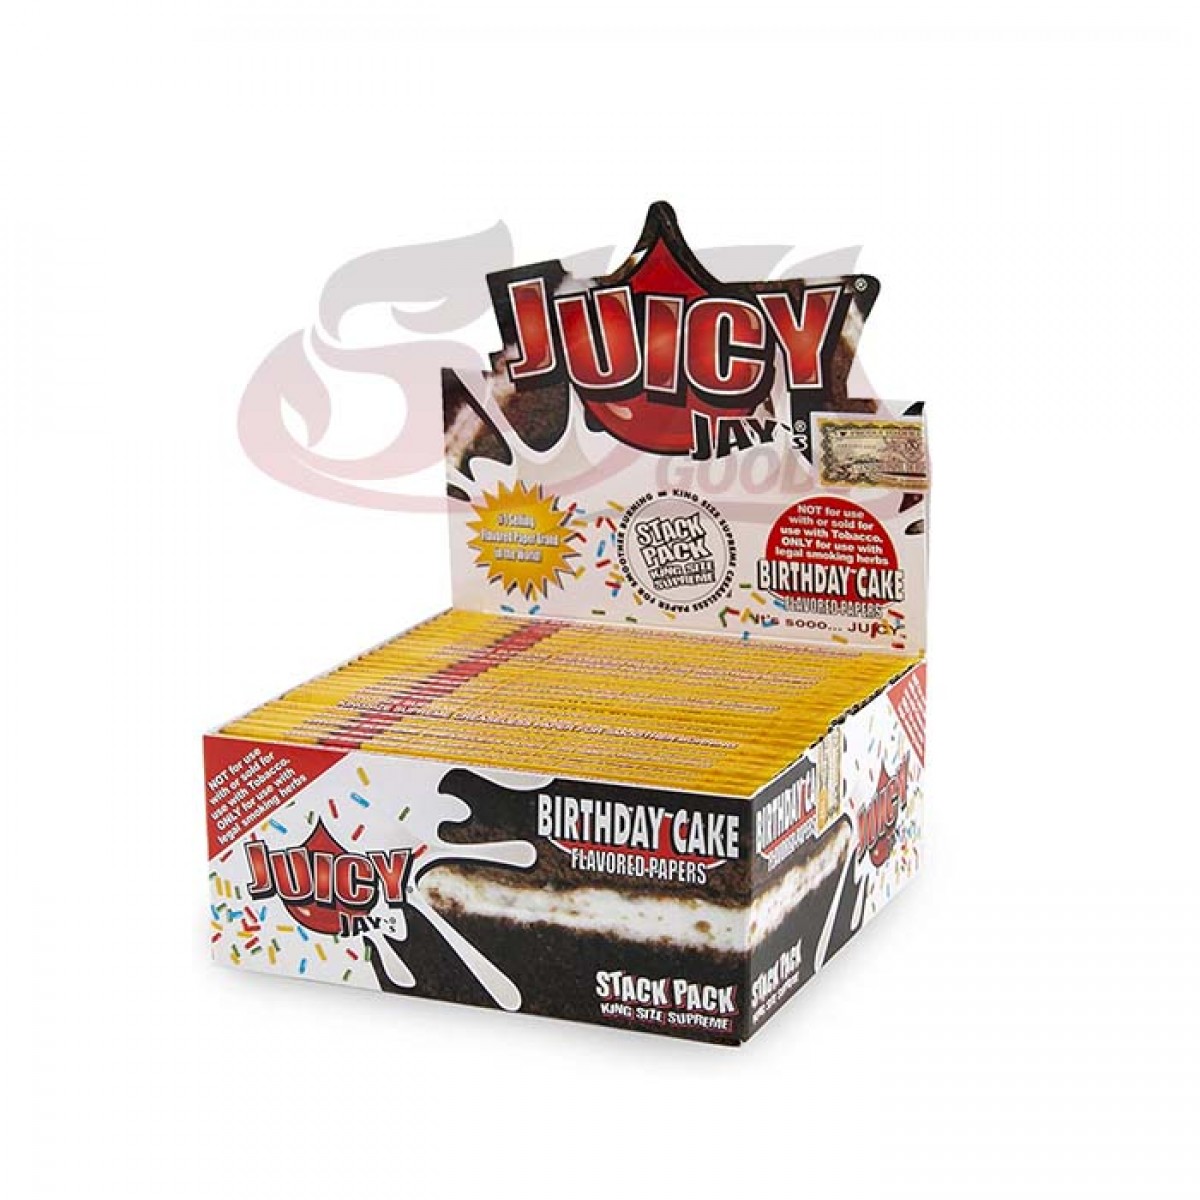 Juicy Jay's Rolling Papers - King Size 24CT)